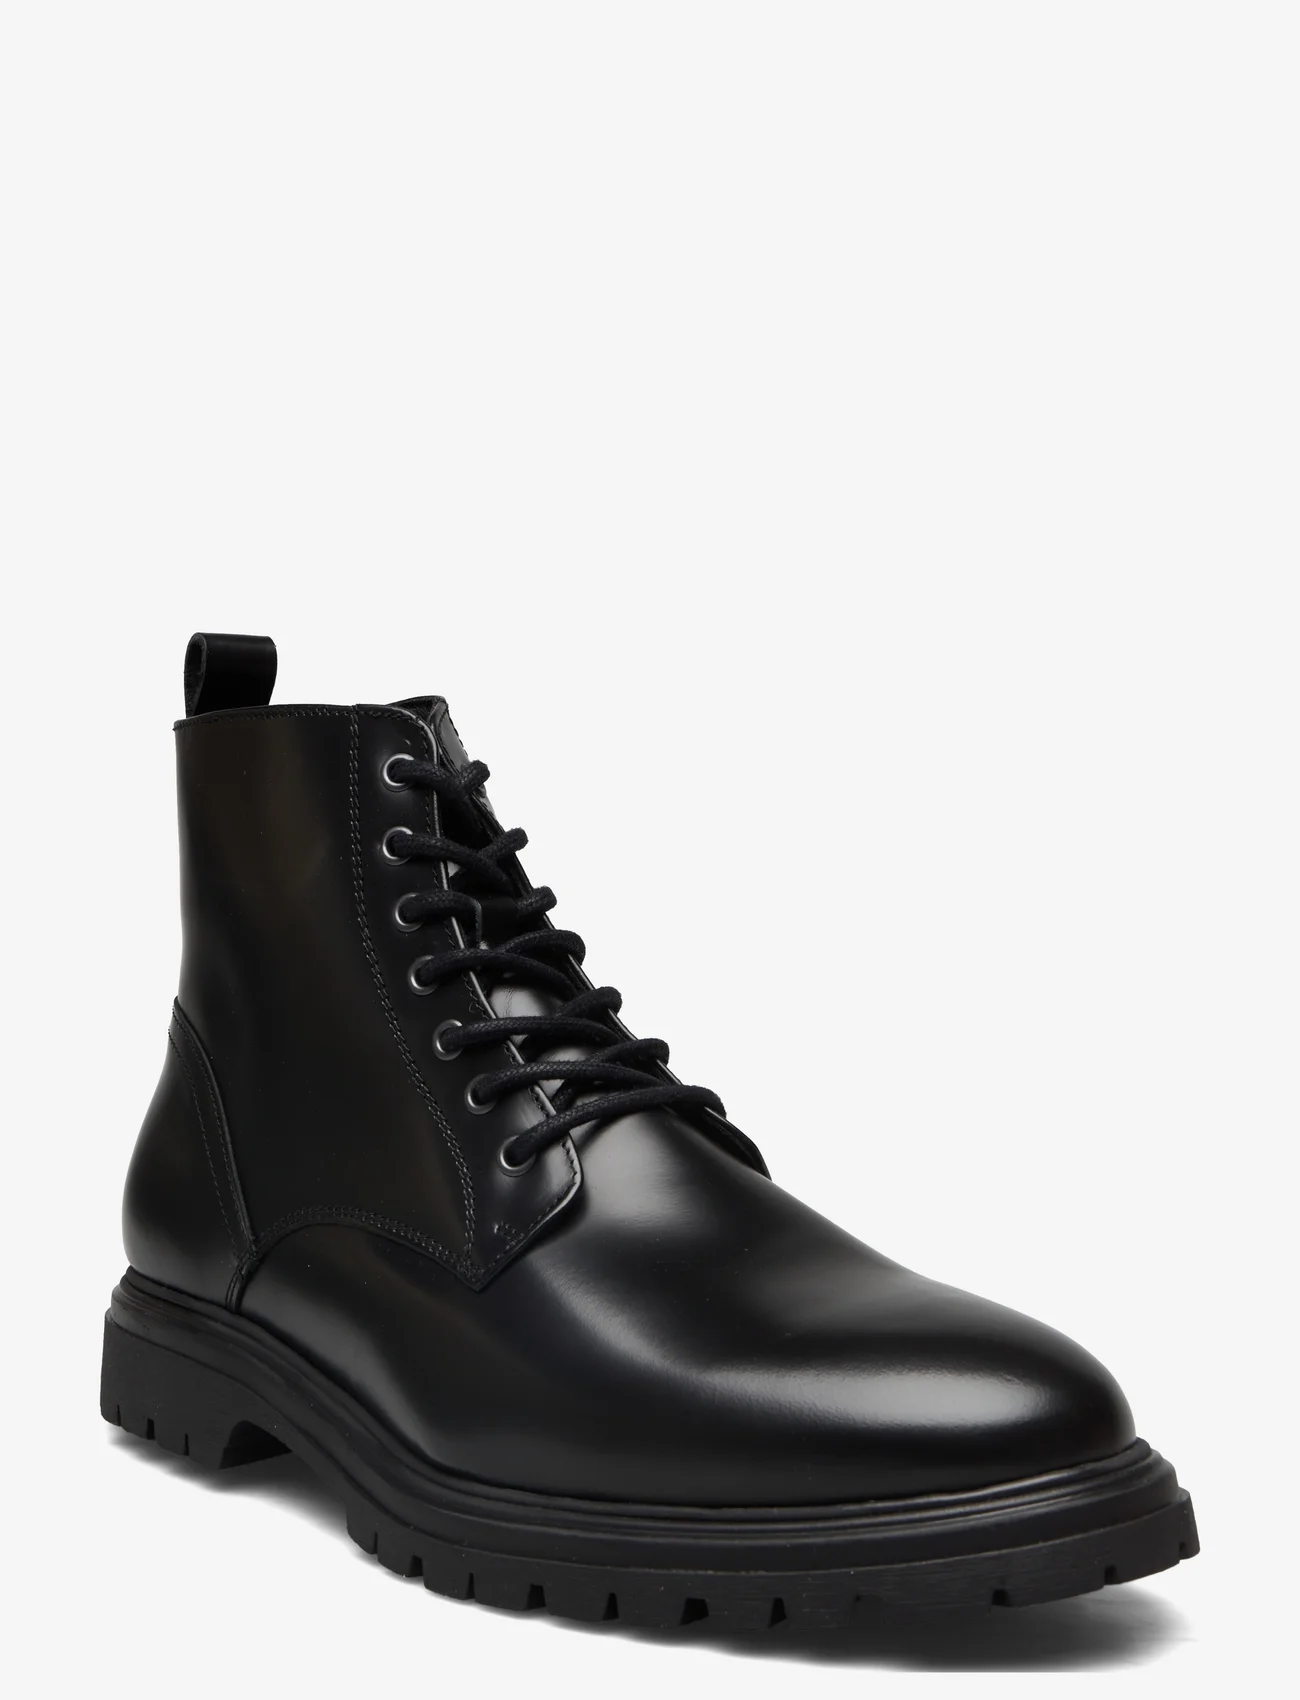 Bianco - BIAGIL Laced Up Boot Polido - lace ups - black - 0